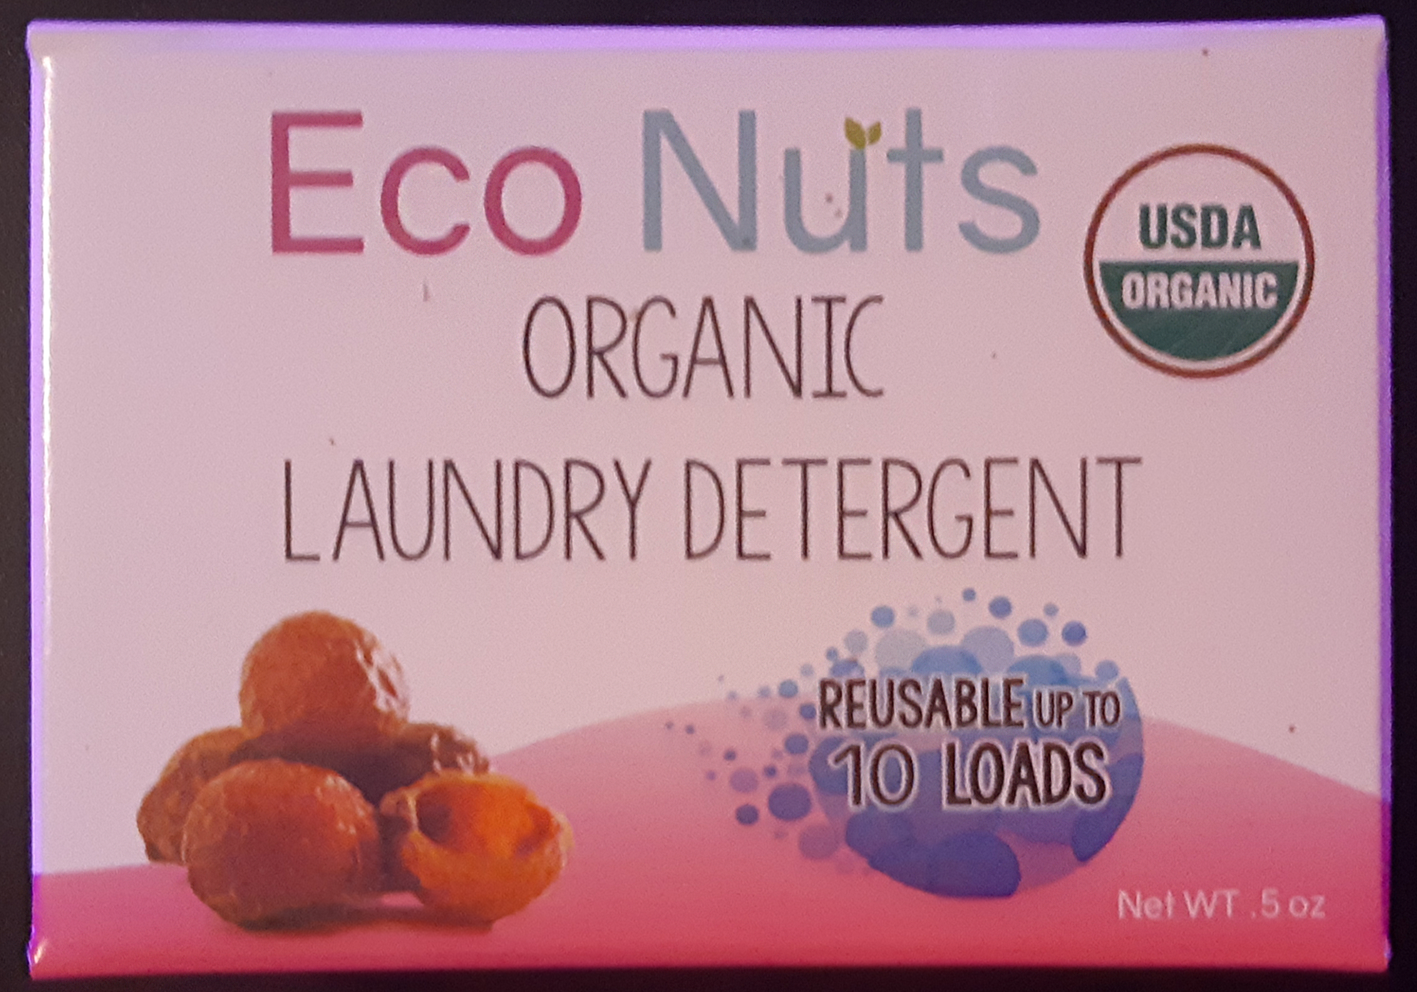 AterImber.com - No. Mad. - Eco Nuts Soap Nuts Sampler Review - Eco Nuts Sampler Box - sustainability, indie author, blogger, soap nuts, laundry, natural laundry detergent, detergent alternatives, natural cleaners